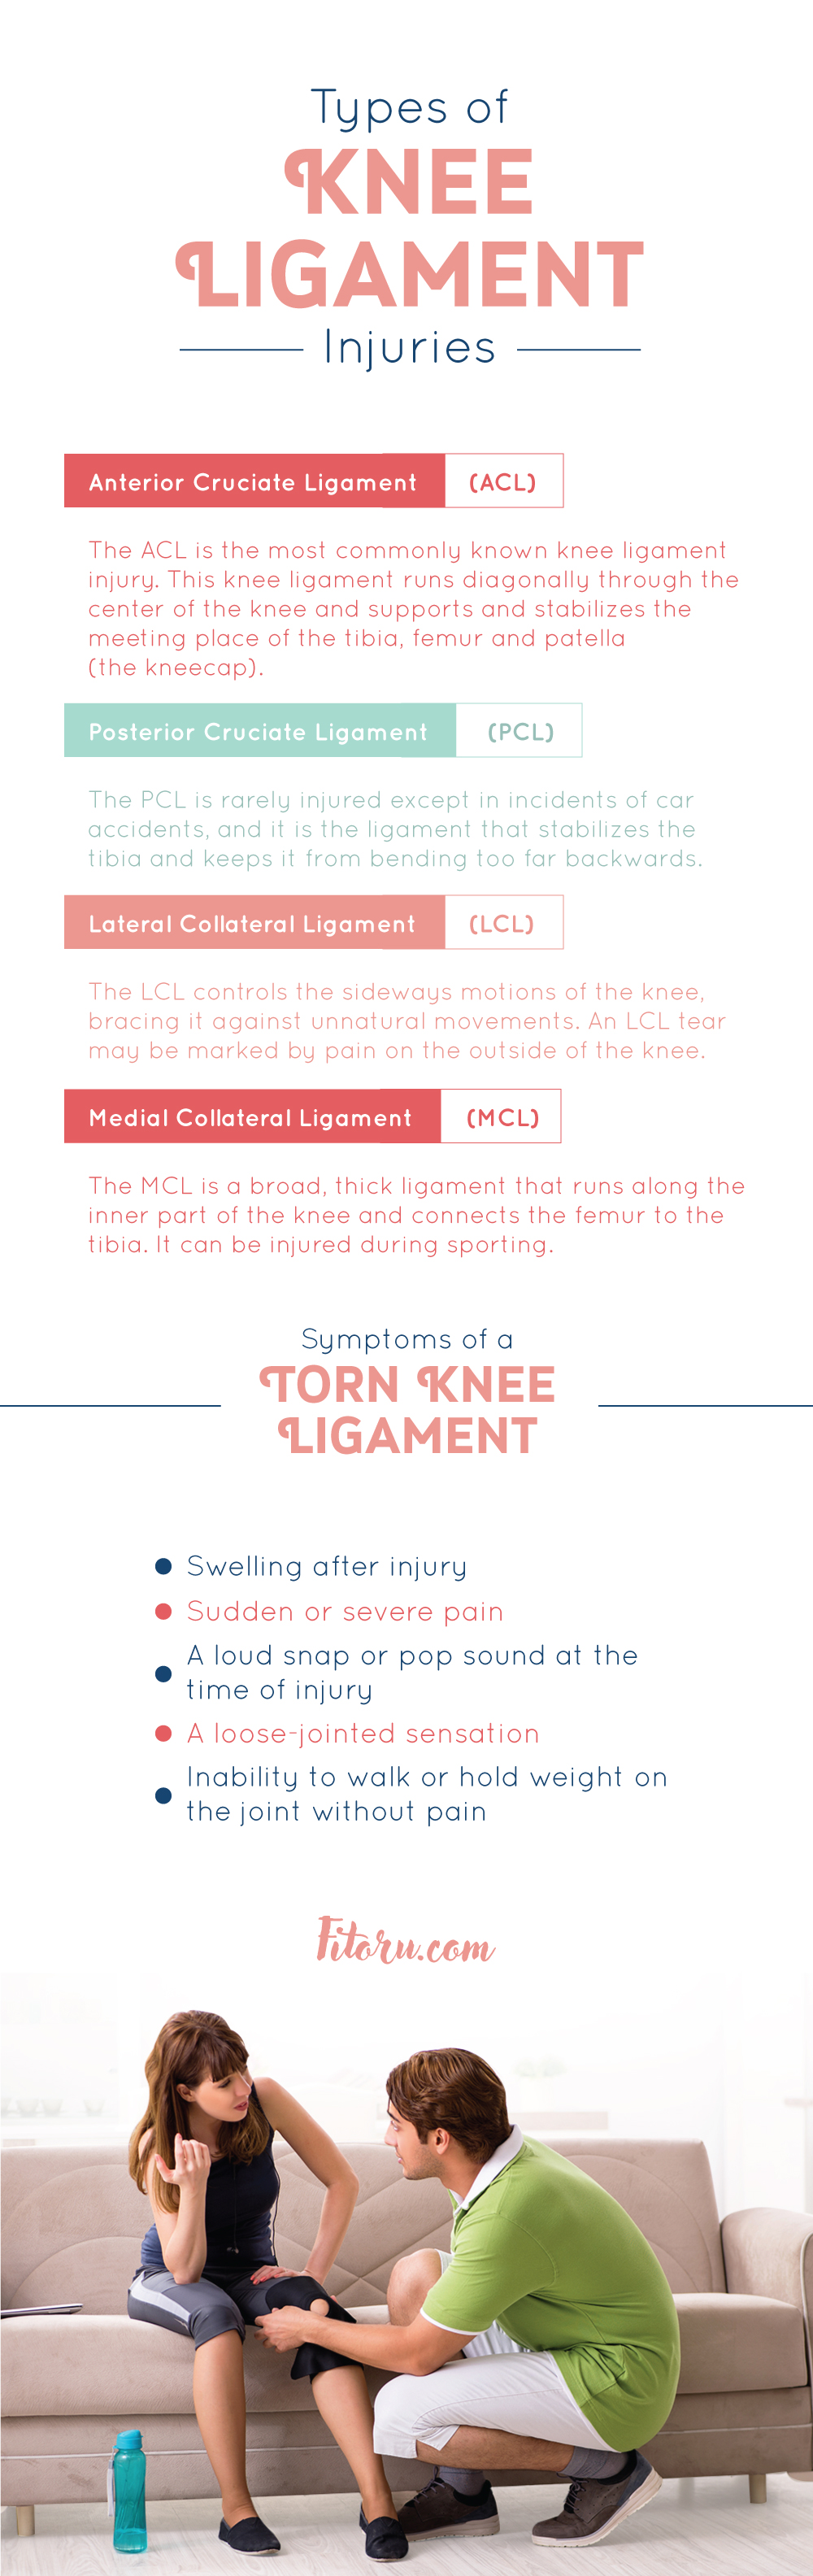 Types of torn ligaments in the knee.